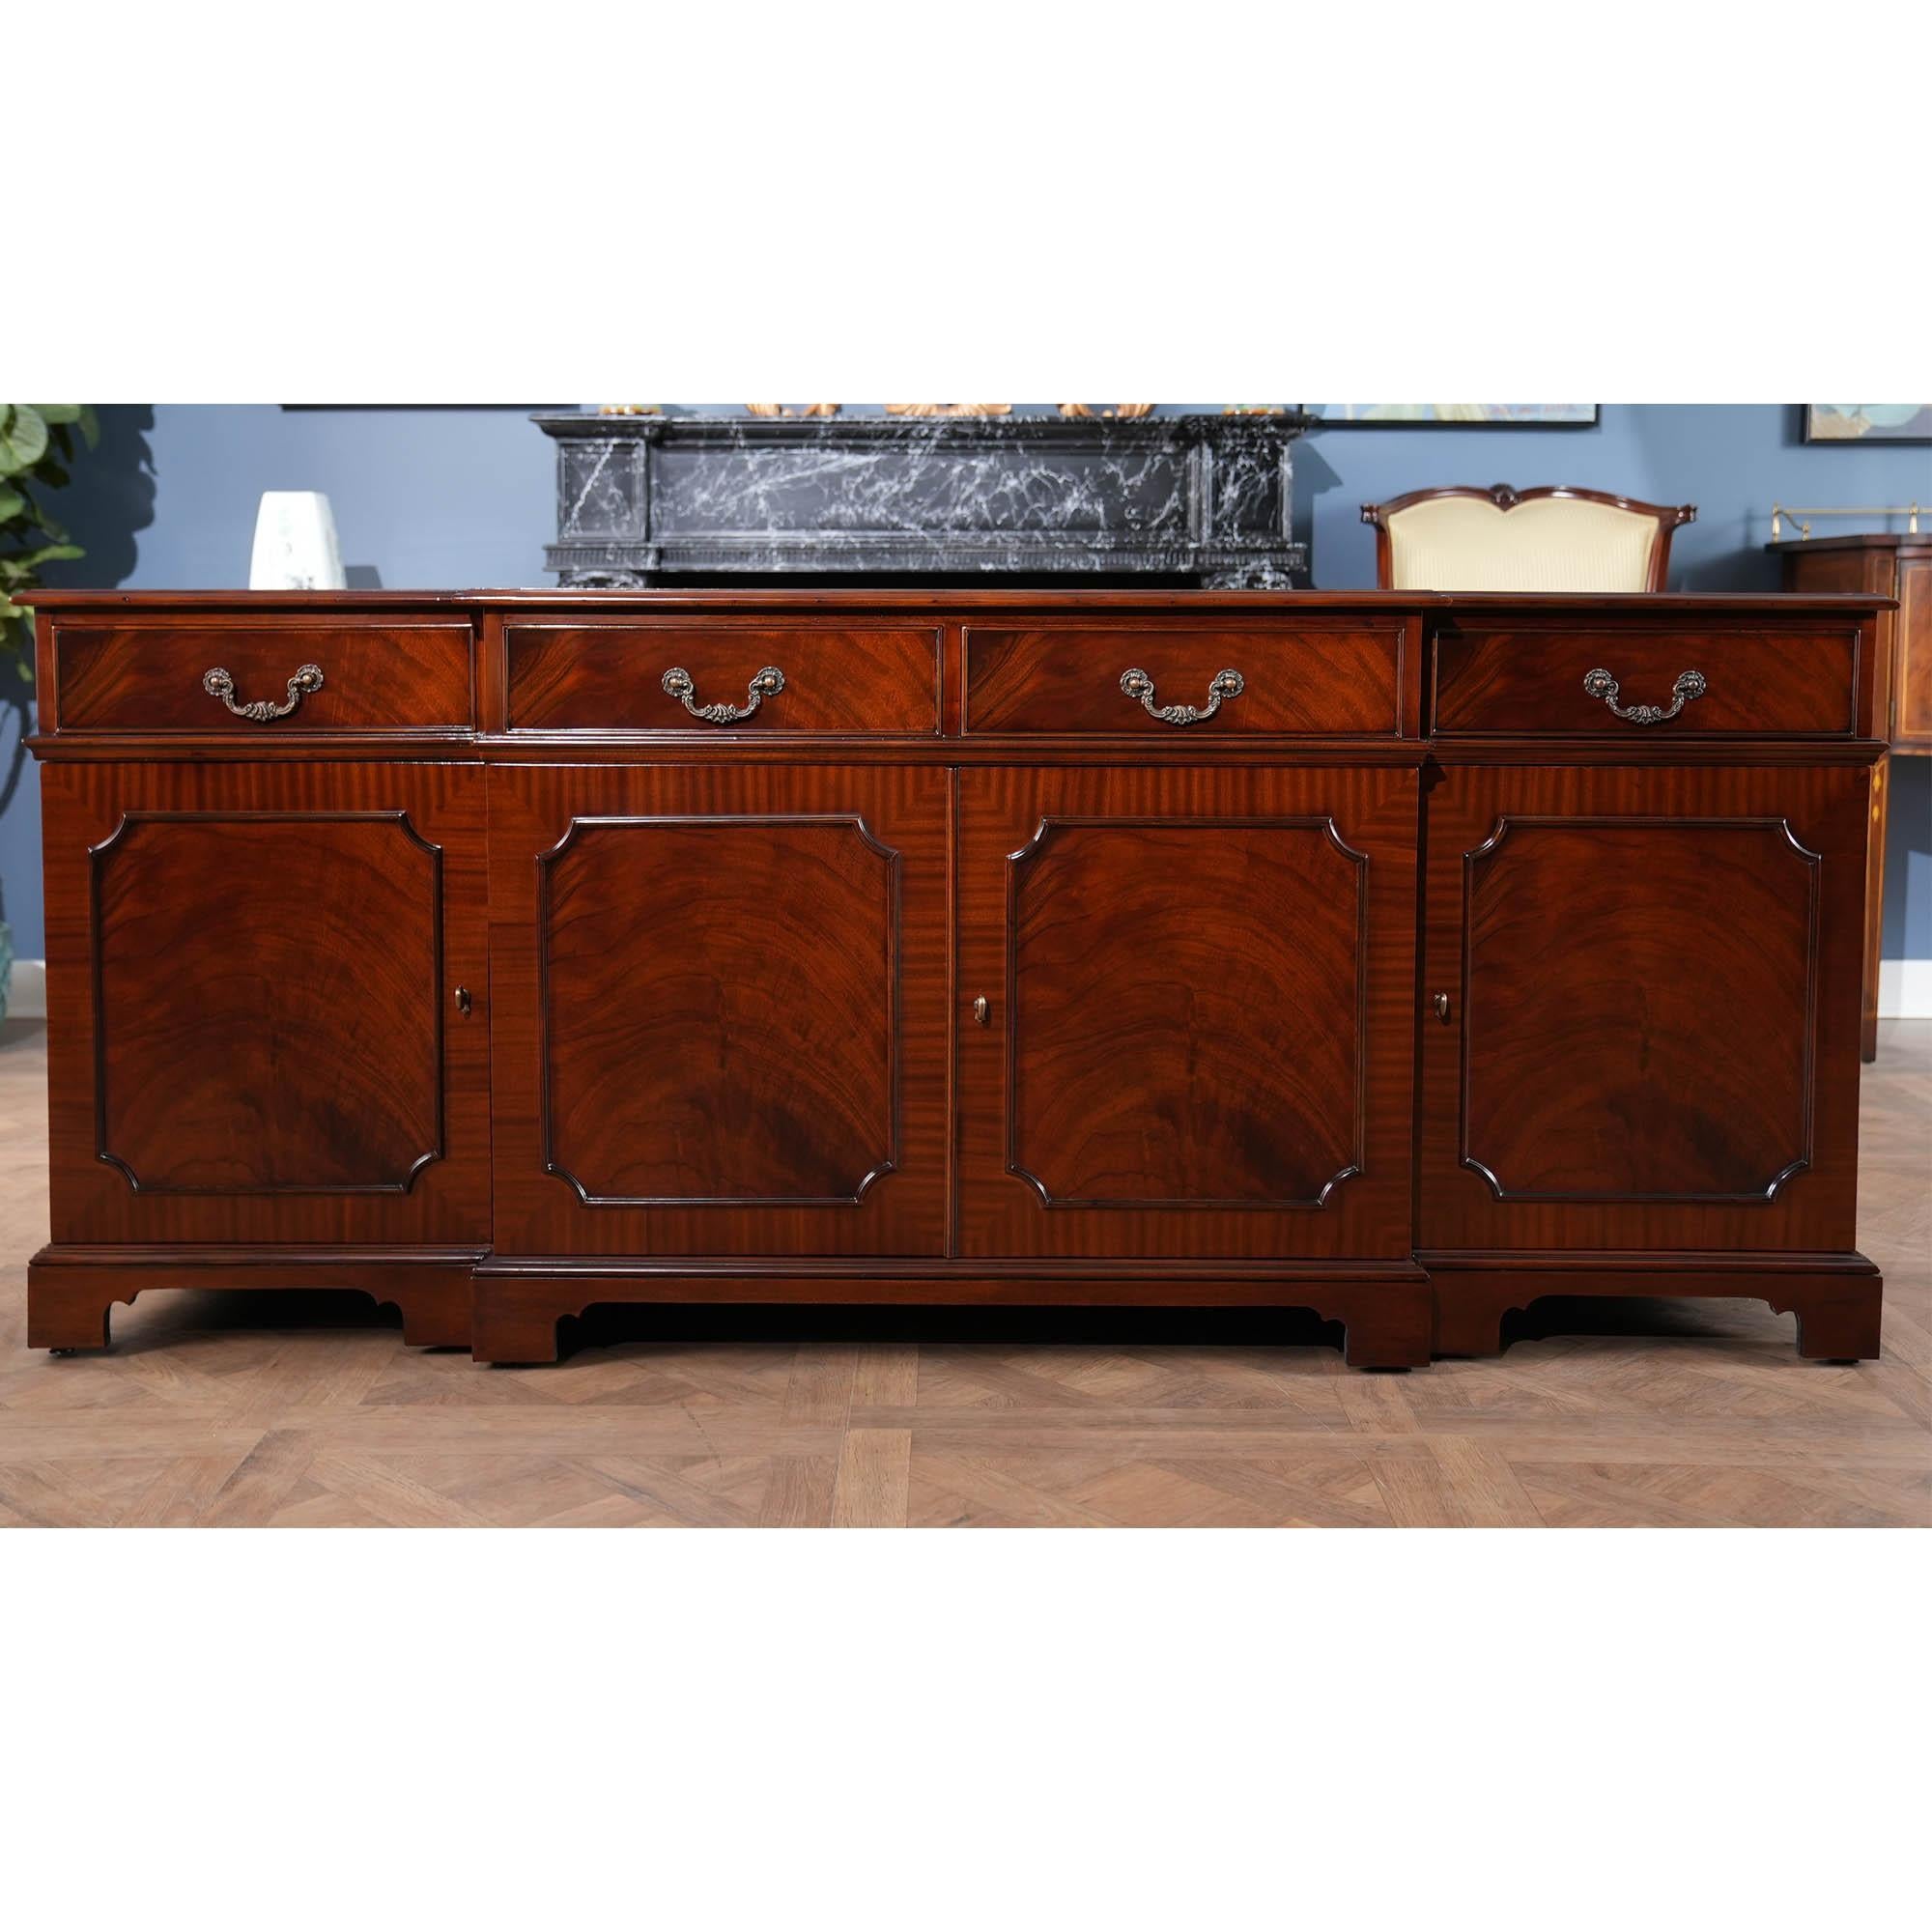 Mahogany Sideboard In New Condition For Sale In Annville, PA